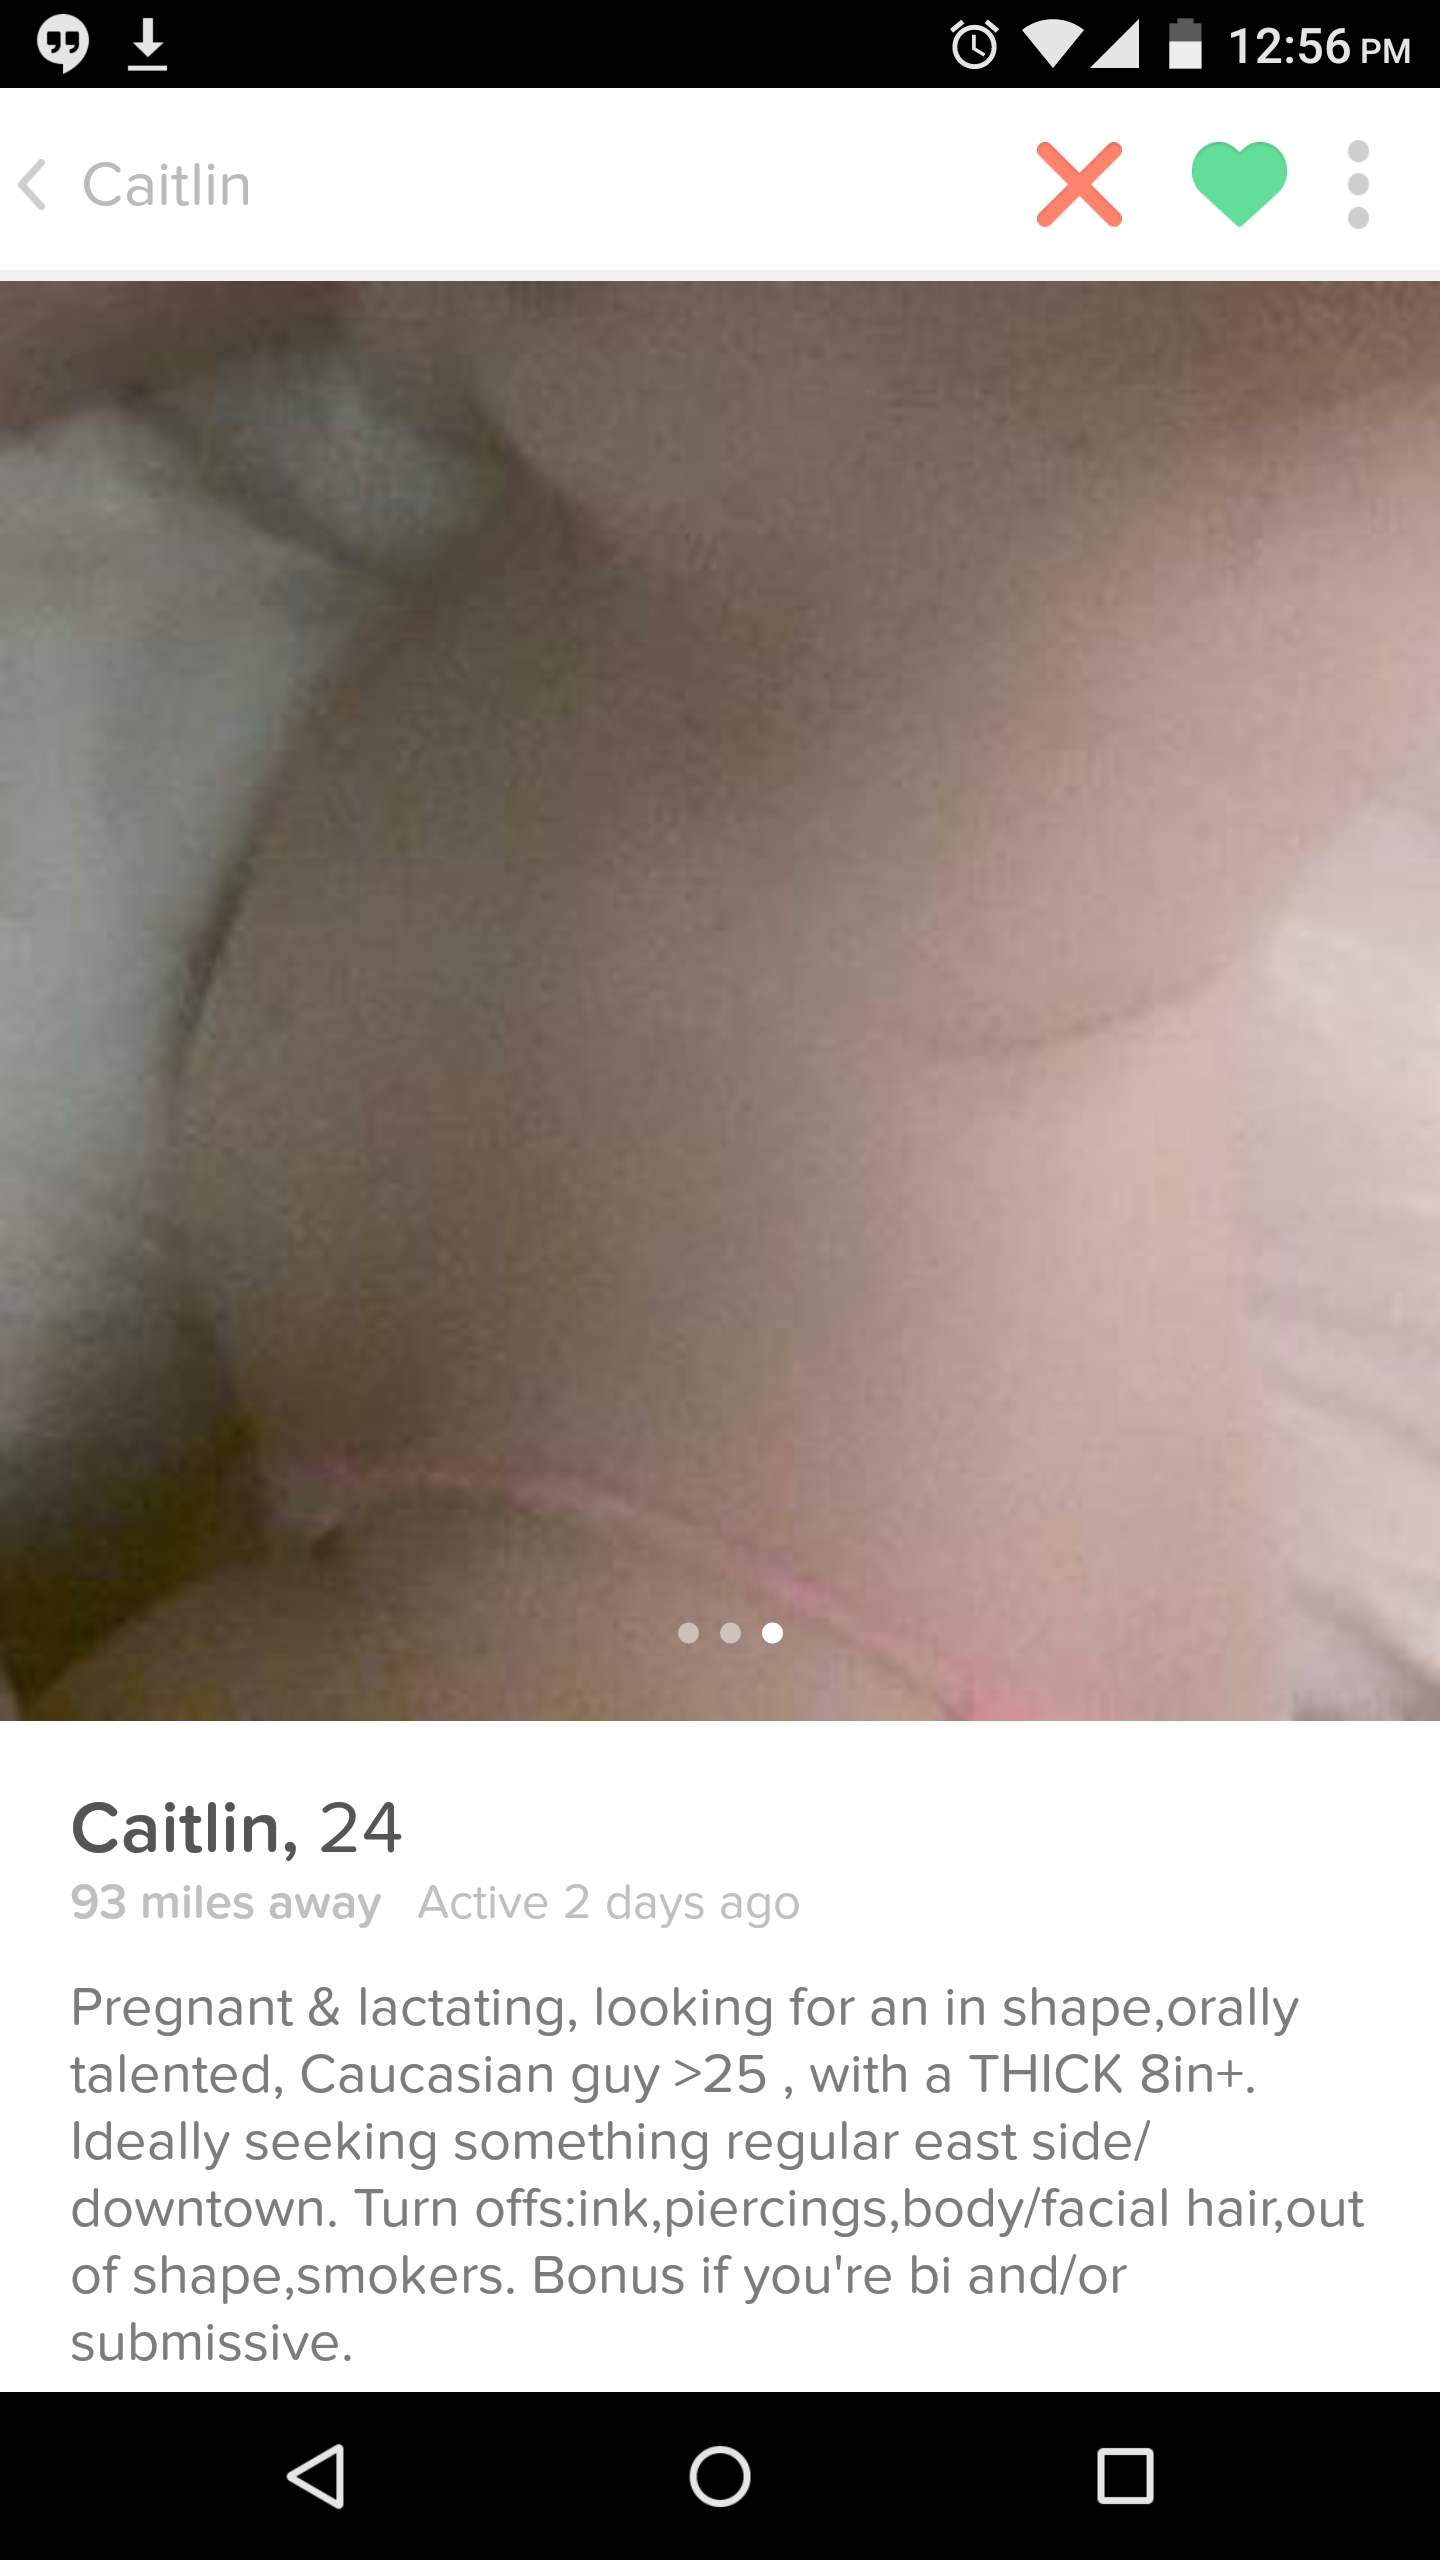 close up - 0 4 . Caitlin Caitlin, 24 93 miles away Active 2 days ago Pregnant & lactating, looking for an in shape orally talented, Caucasian guy>25, with a Thick Sint. Ideally seeking something regular east side downtown, Turn offsink. piercings, bodyfac